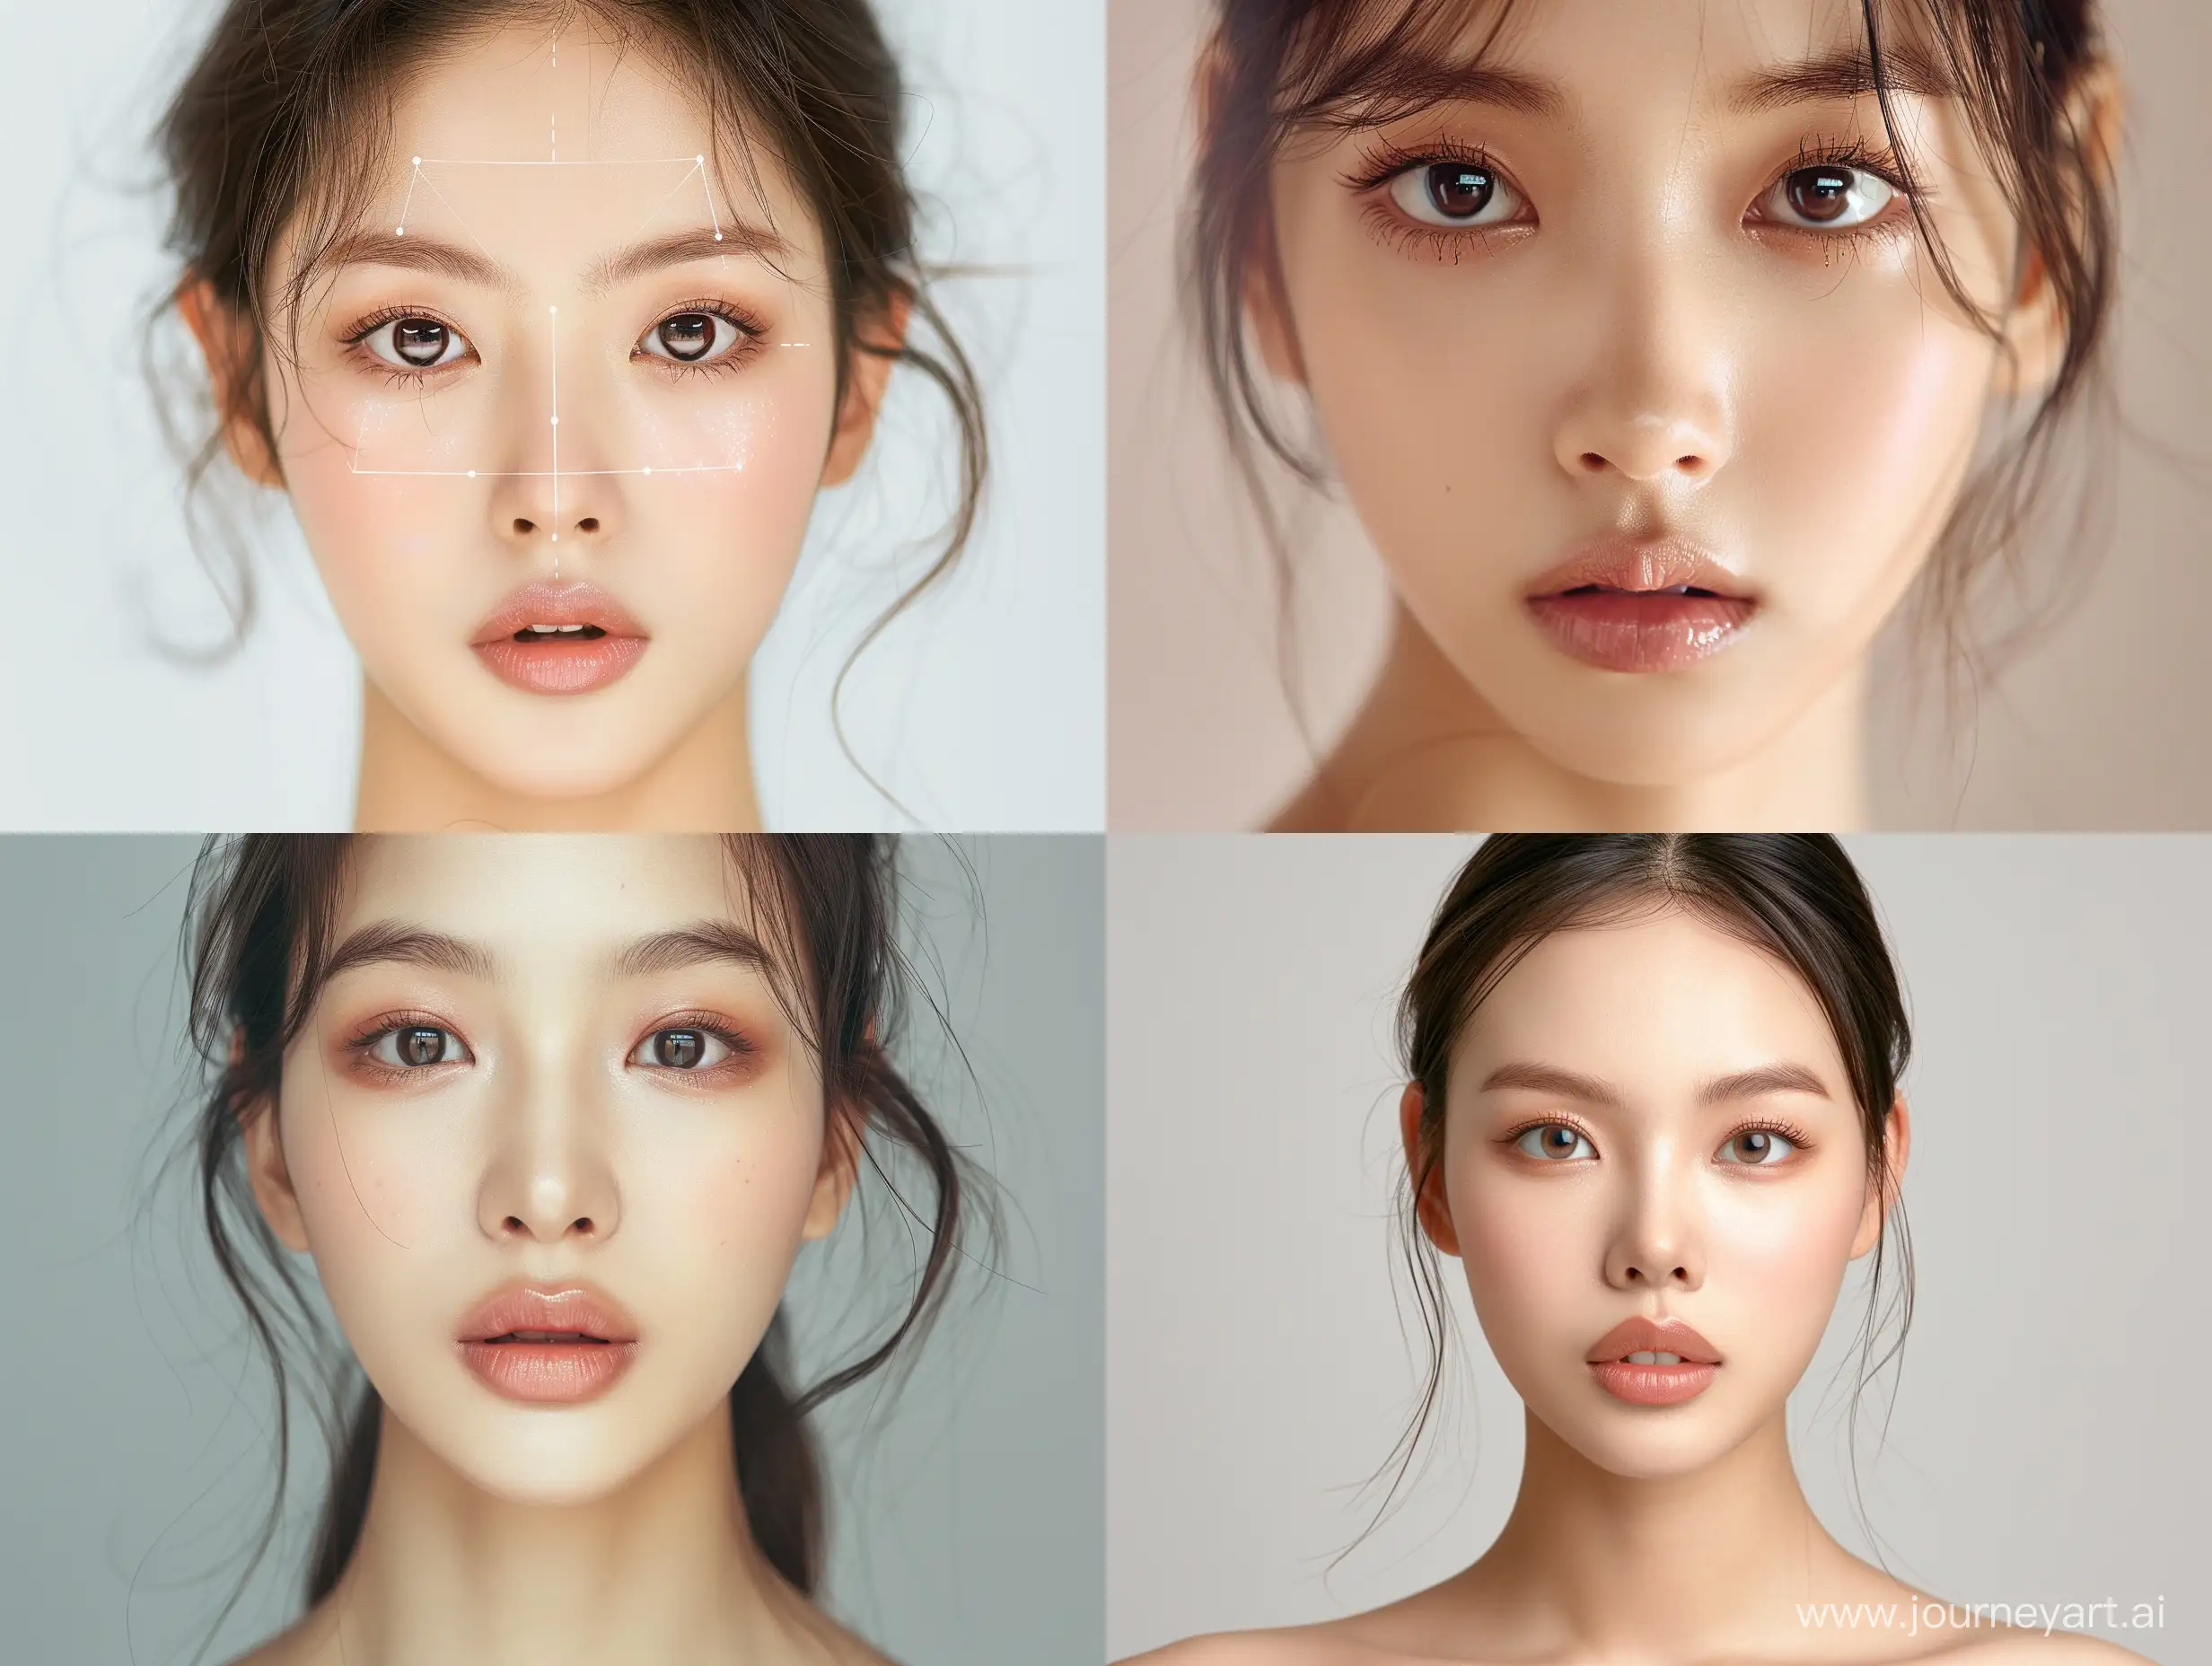 Youthful-Asian-Beauty-with-Striking-Resemblance-to-Blackpinks-Jennie